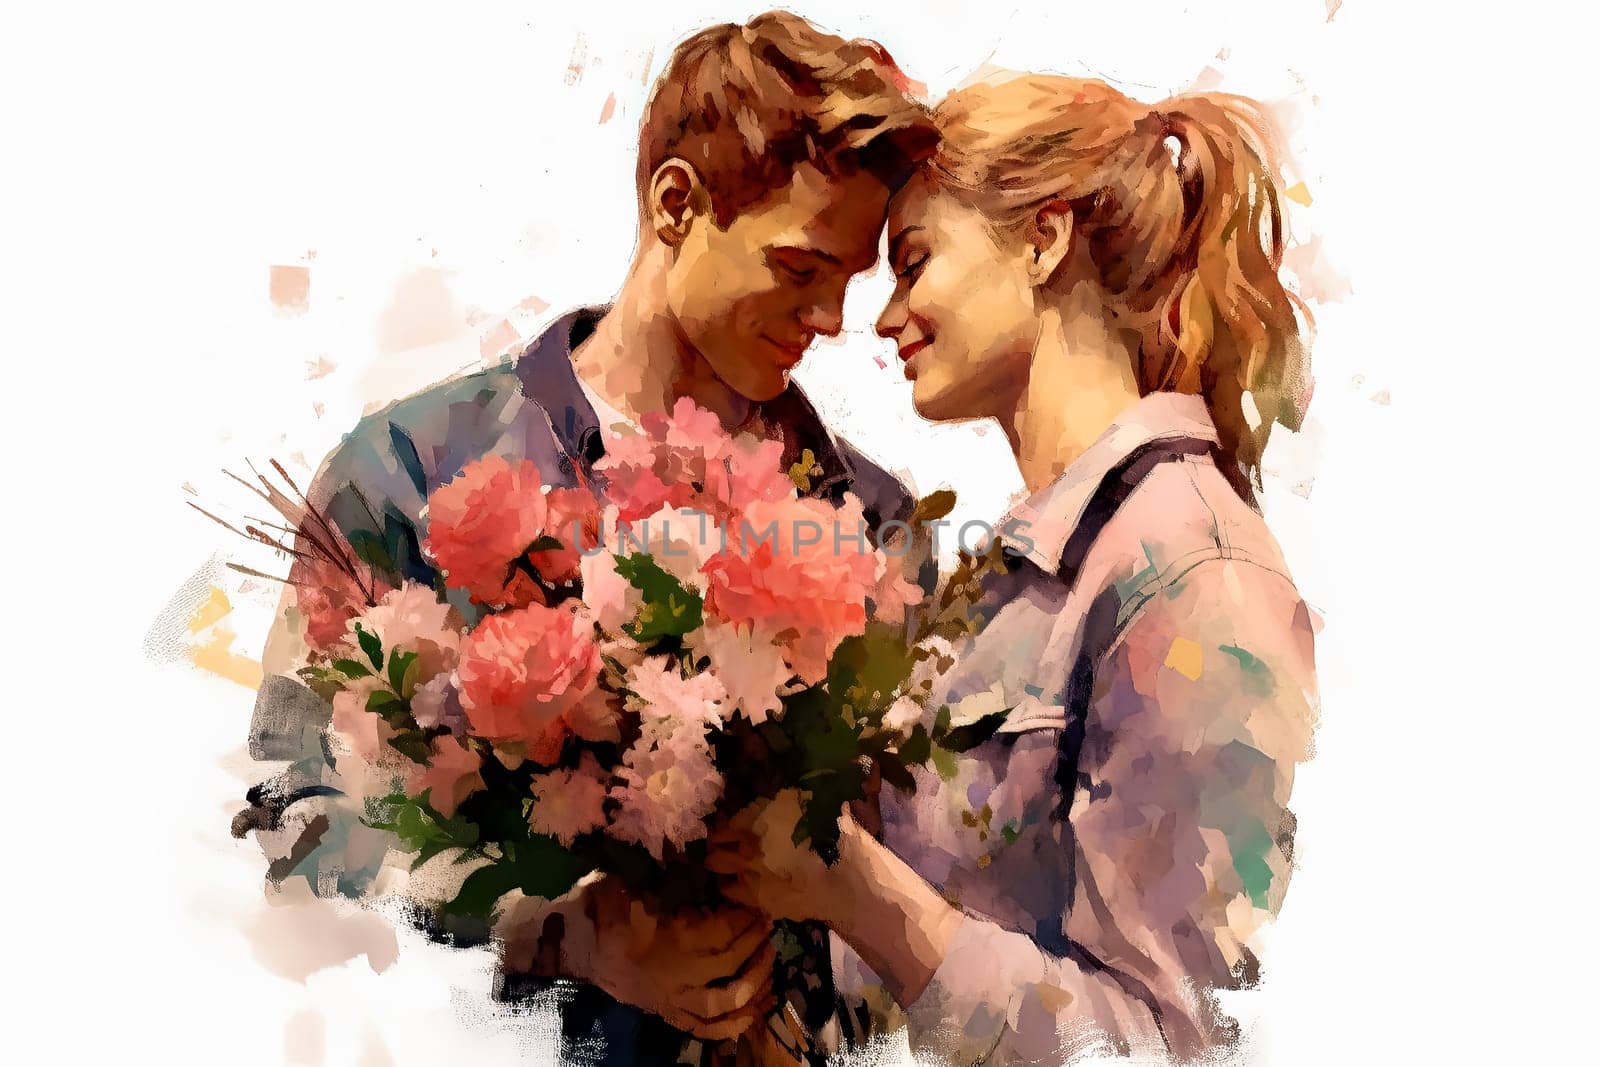 Experience the tenderness of a romantic date as a watercolor illustration beautifully depicts a guy presenting a bouquet of flowers to a delighted girl.